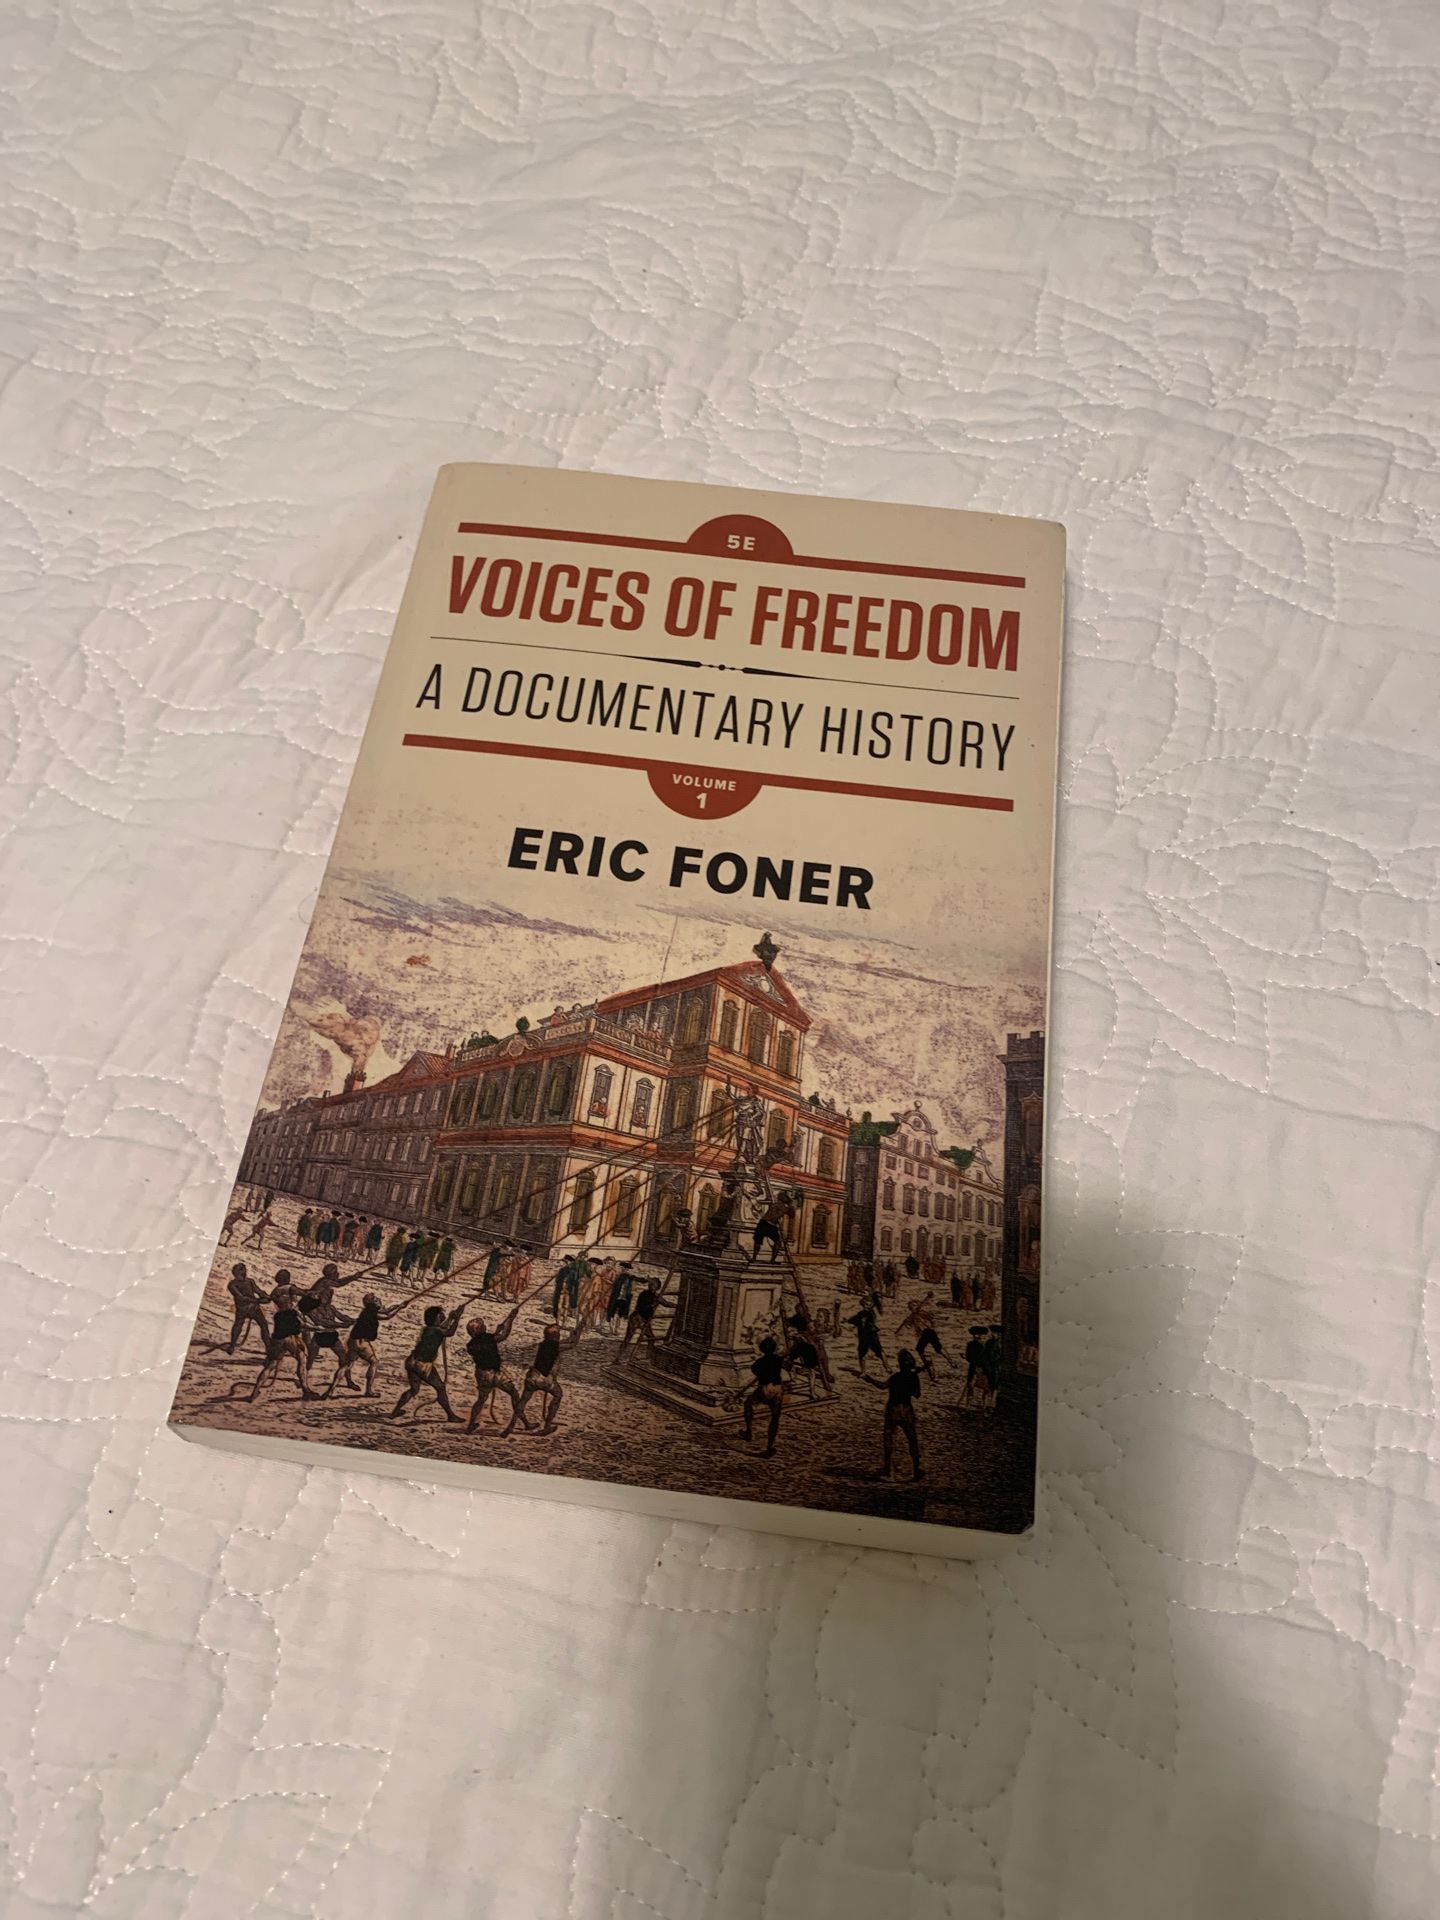 Voices of freedom by Eric Foner